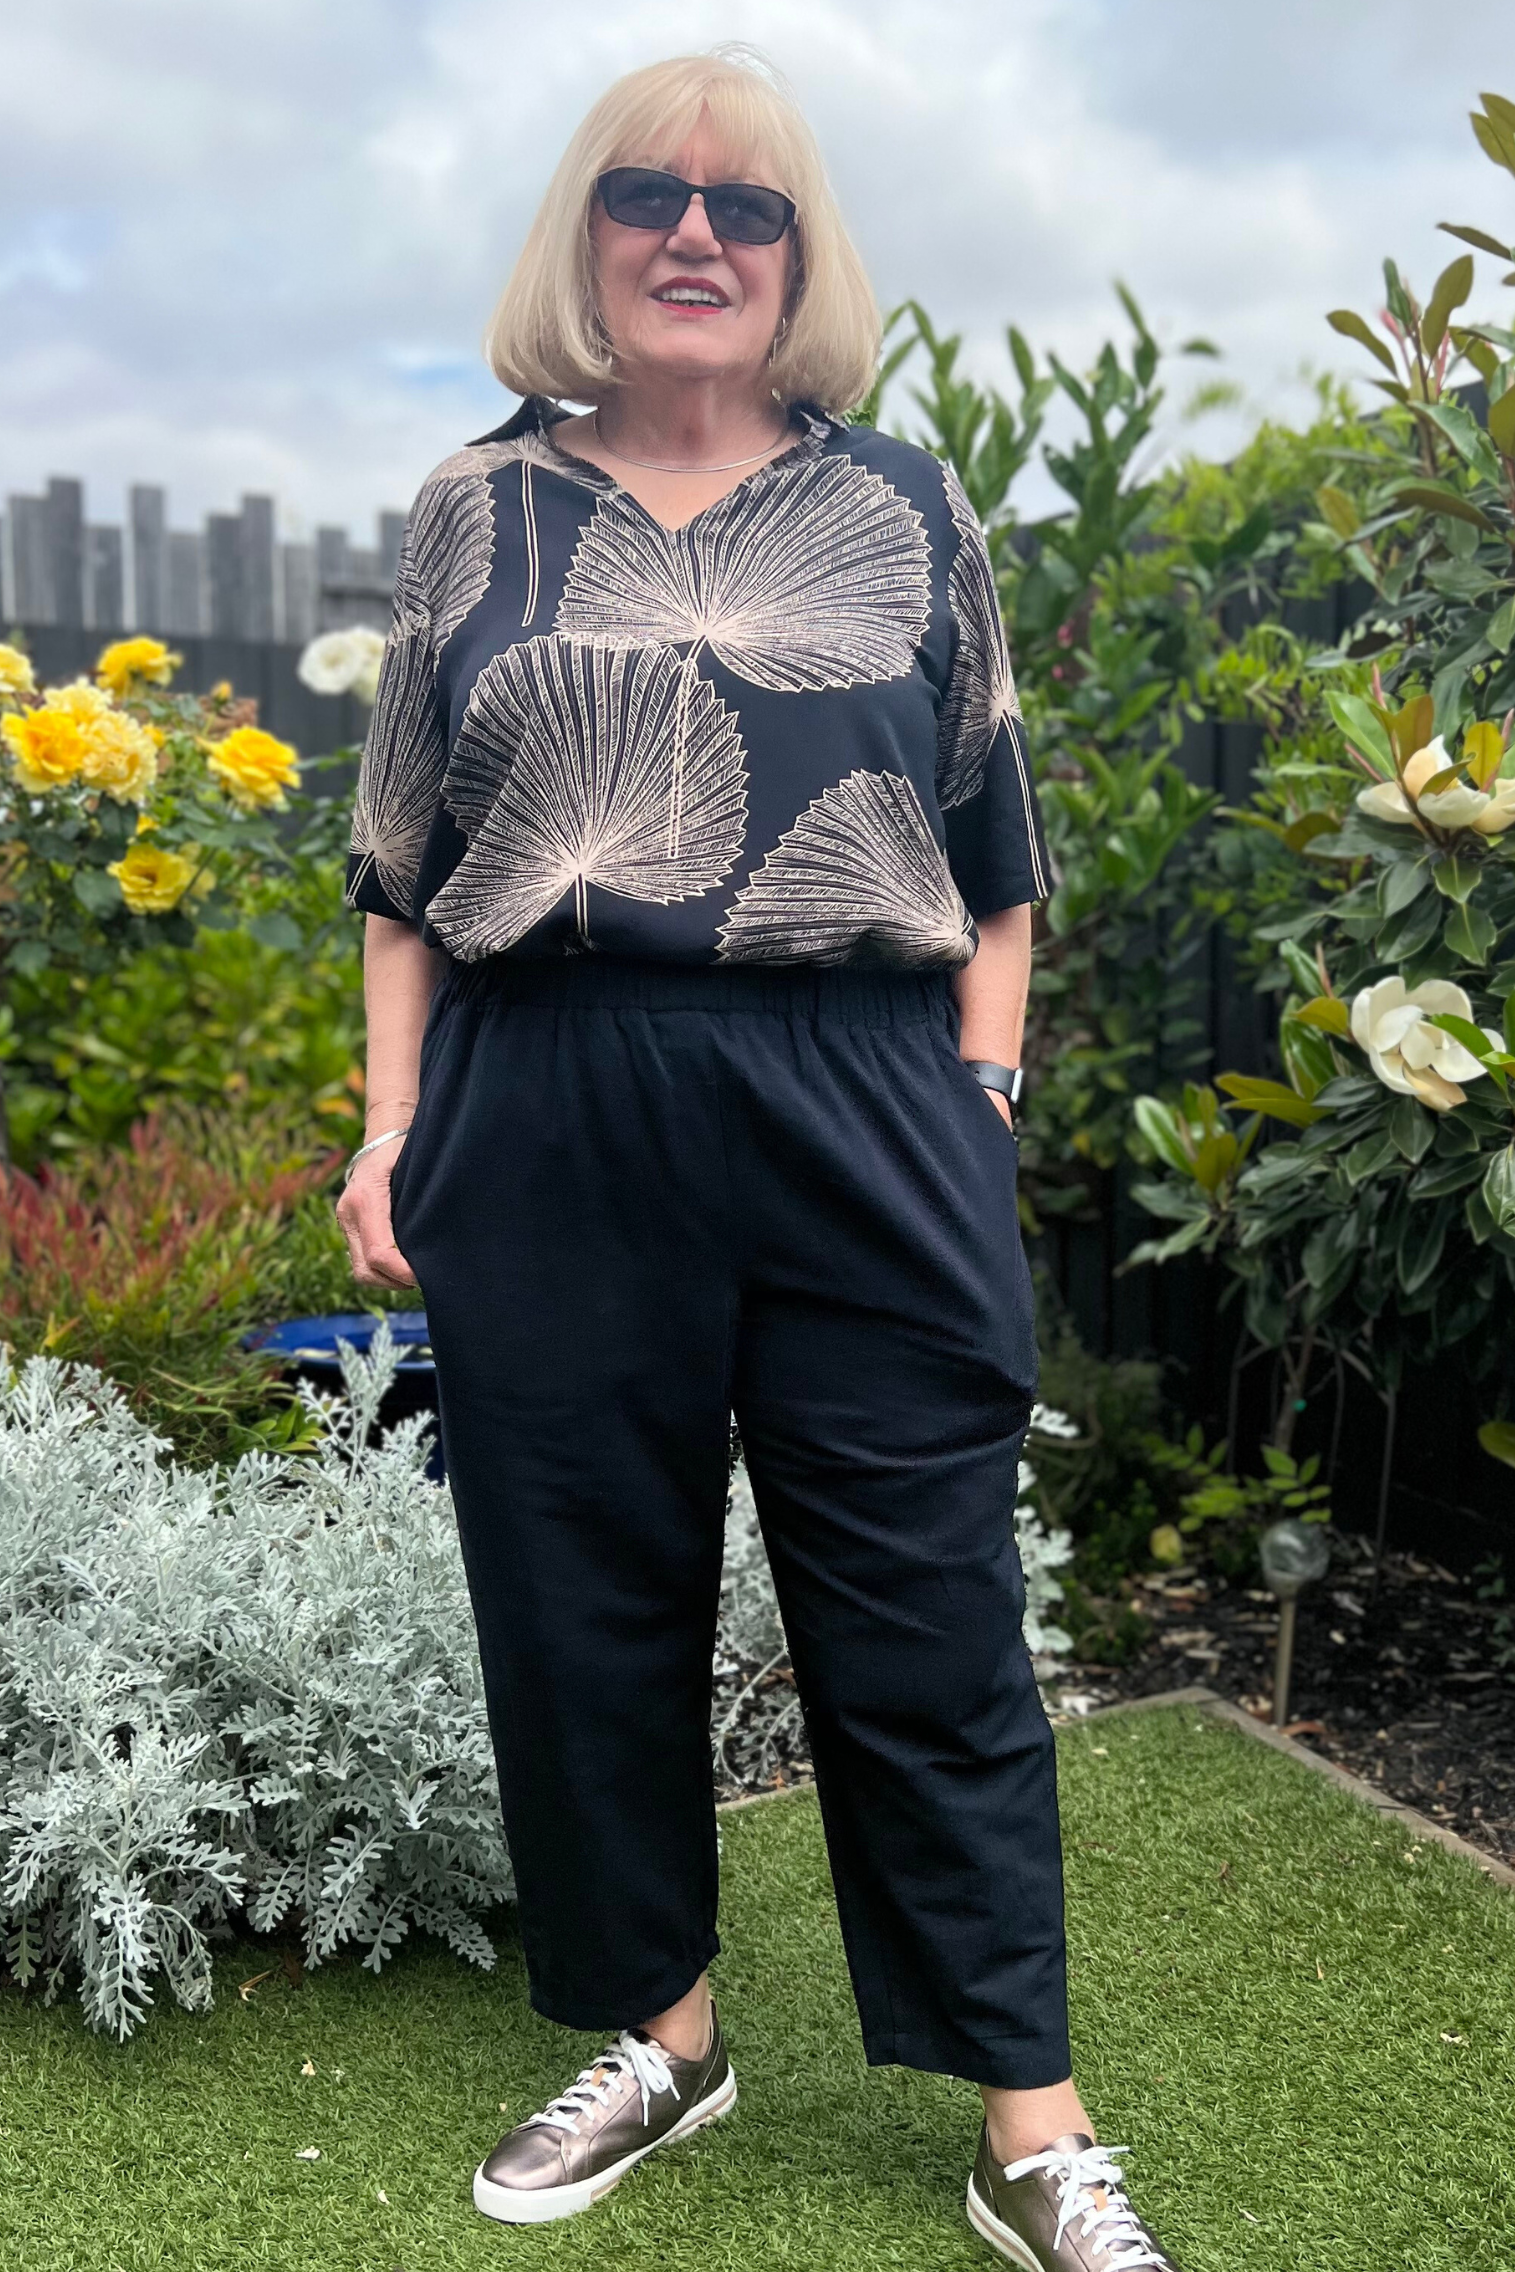 Kita Ku modelling the cotton black pant port with a top rebecca in Paolo print, and set in a sunny garden. 